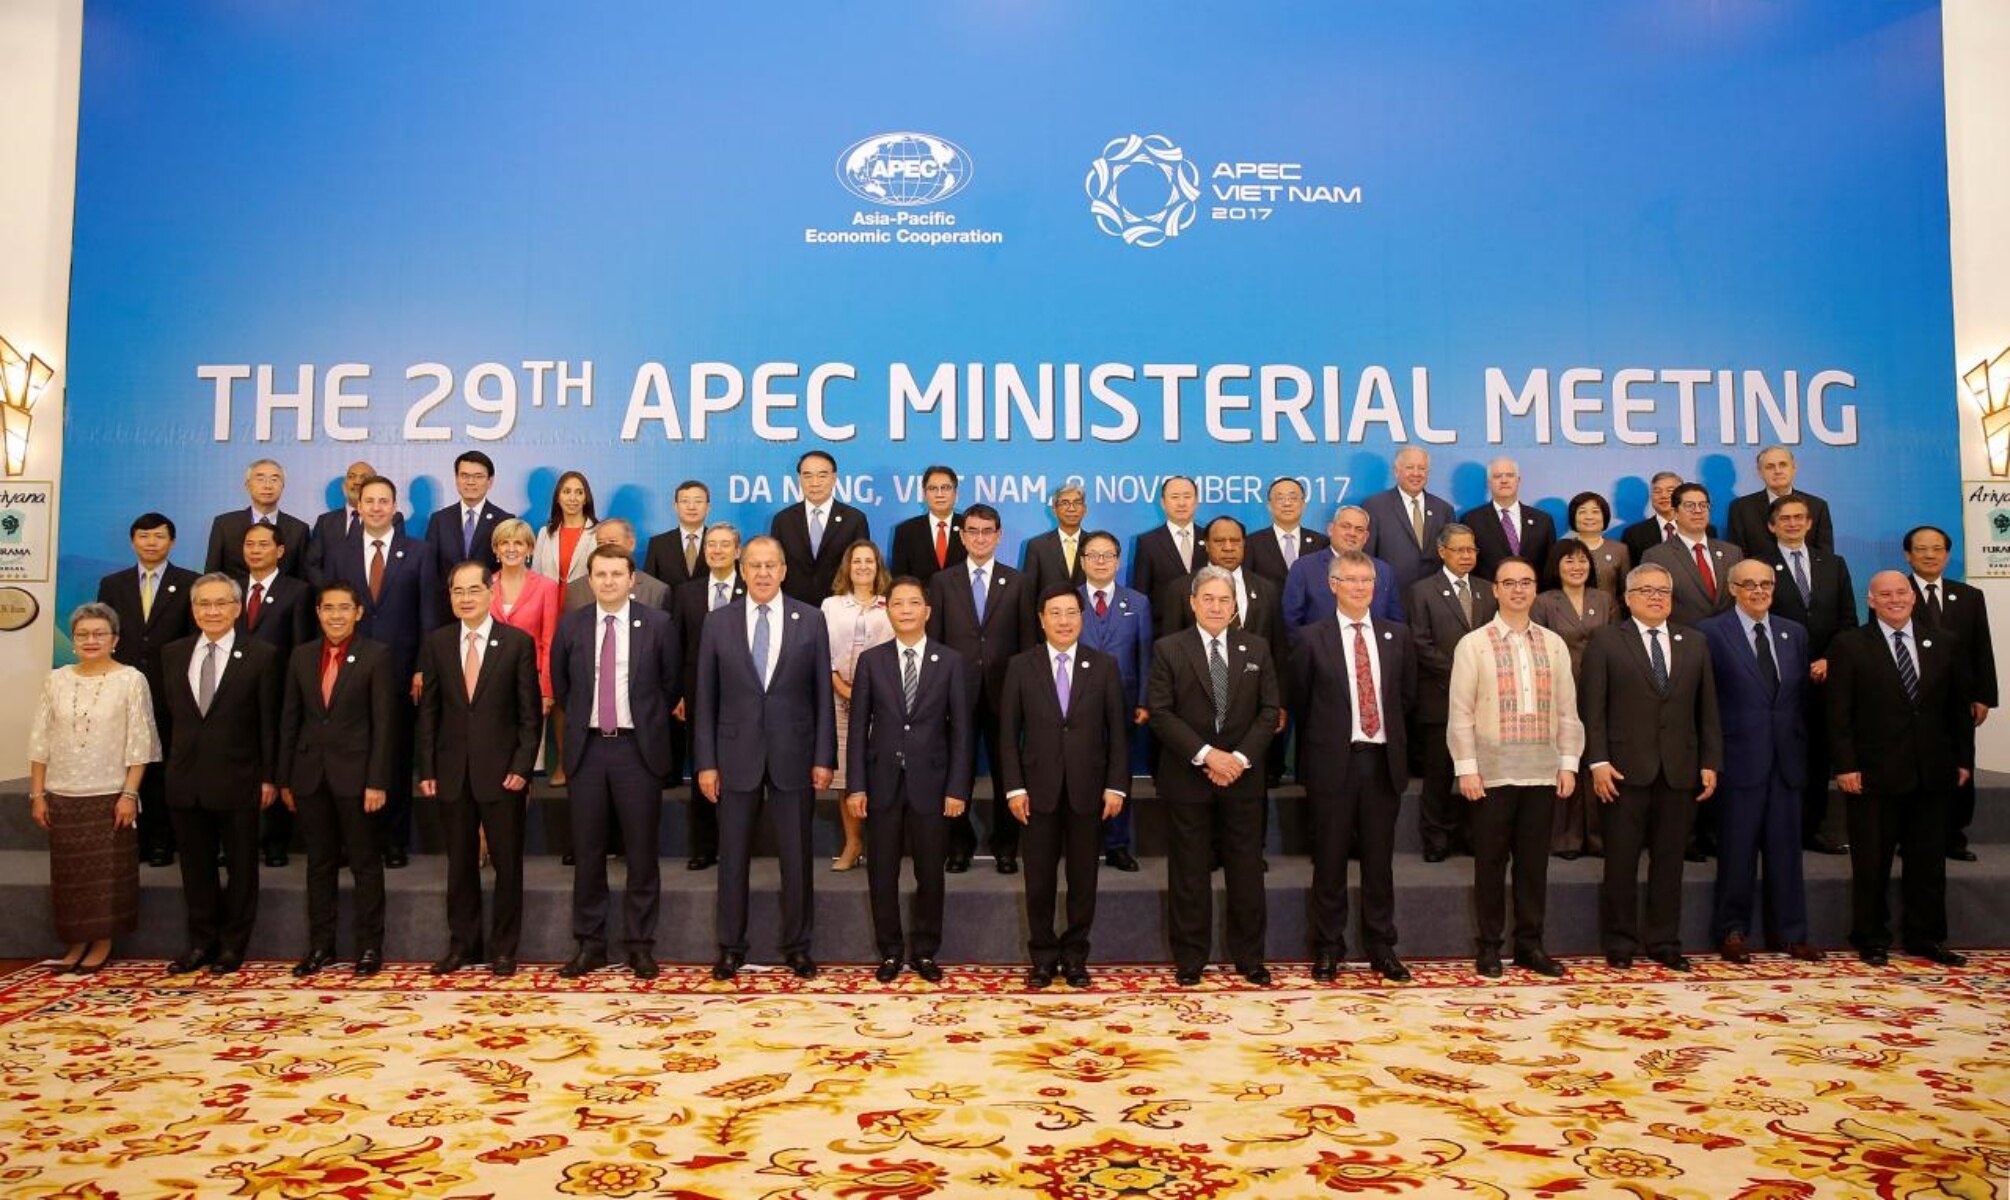 12 Facts About AsiaPacific Economic Cooperation (APEC) Summit